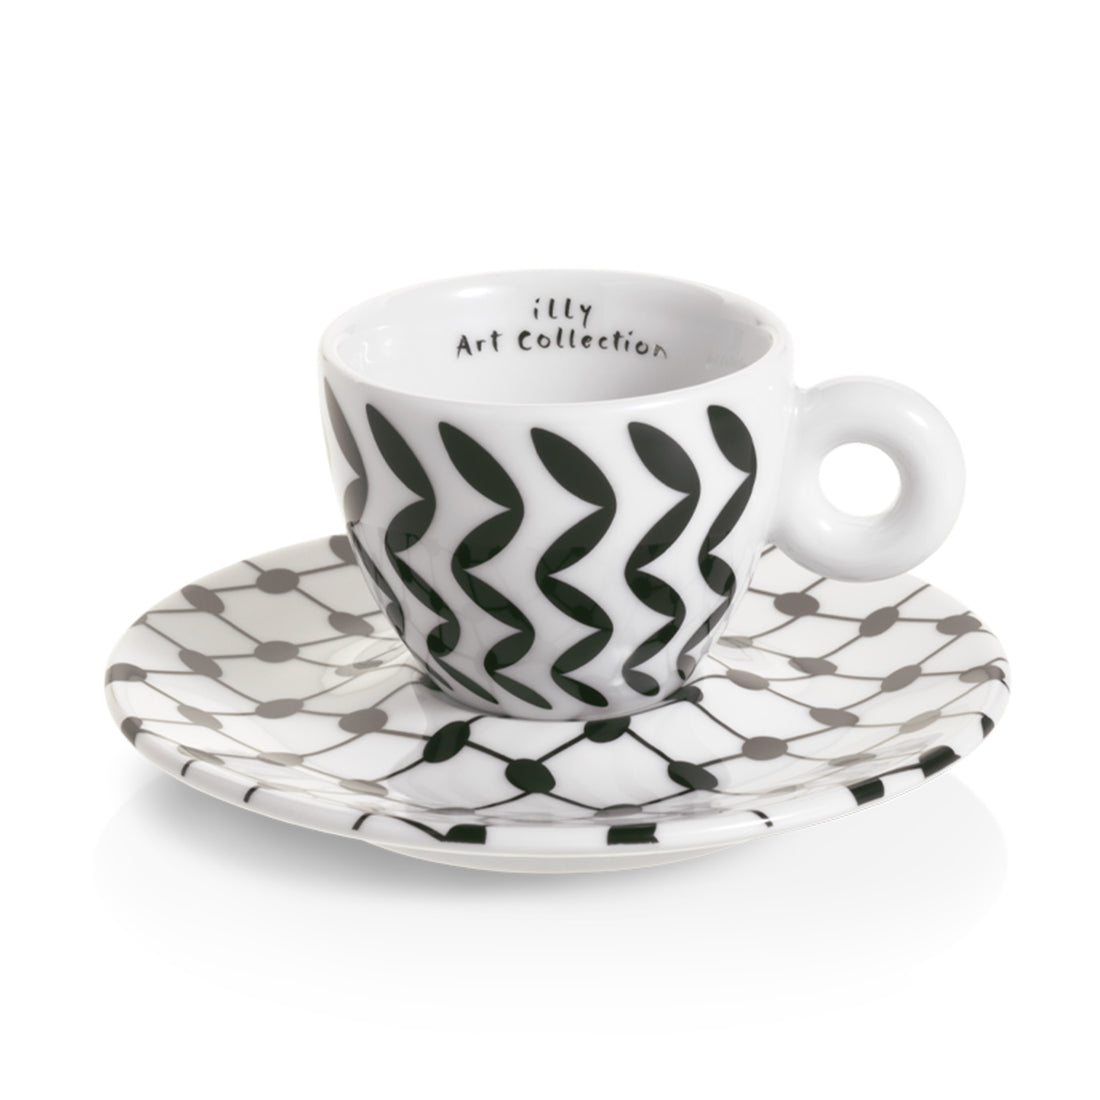 Illy Mona Hatoum Set of 6 Espresso Cups and Saucers